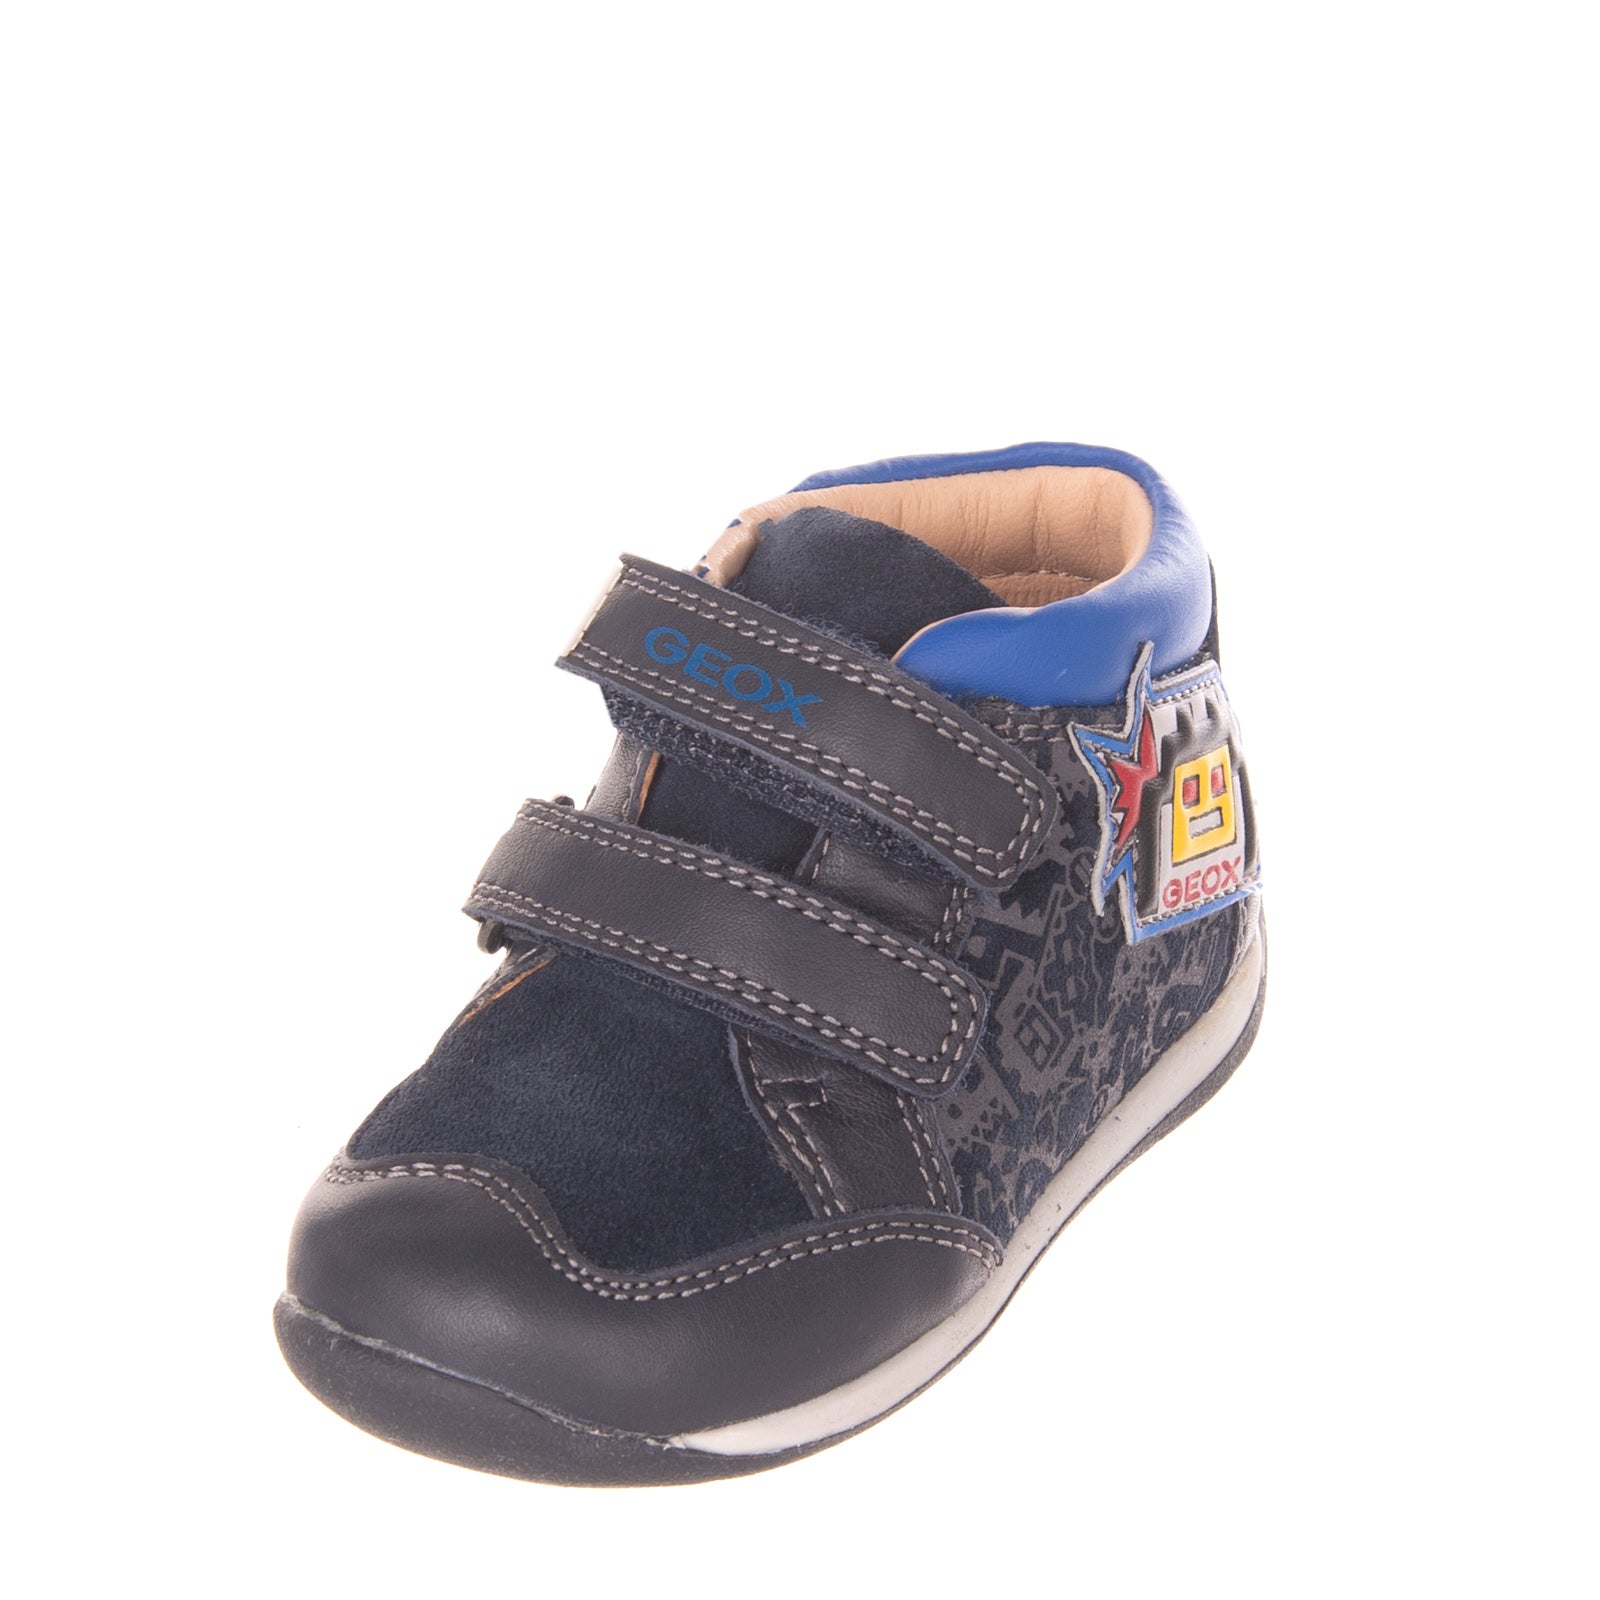 GEOX RESPIRA Baby Leather Sneakers EU 20 UK 3.5 US 4.5 Patterned Antishock gallery main photo